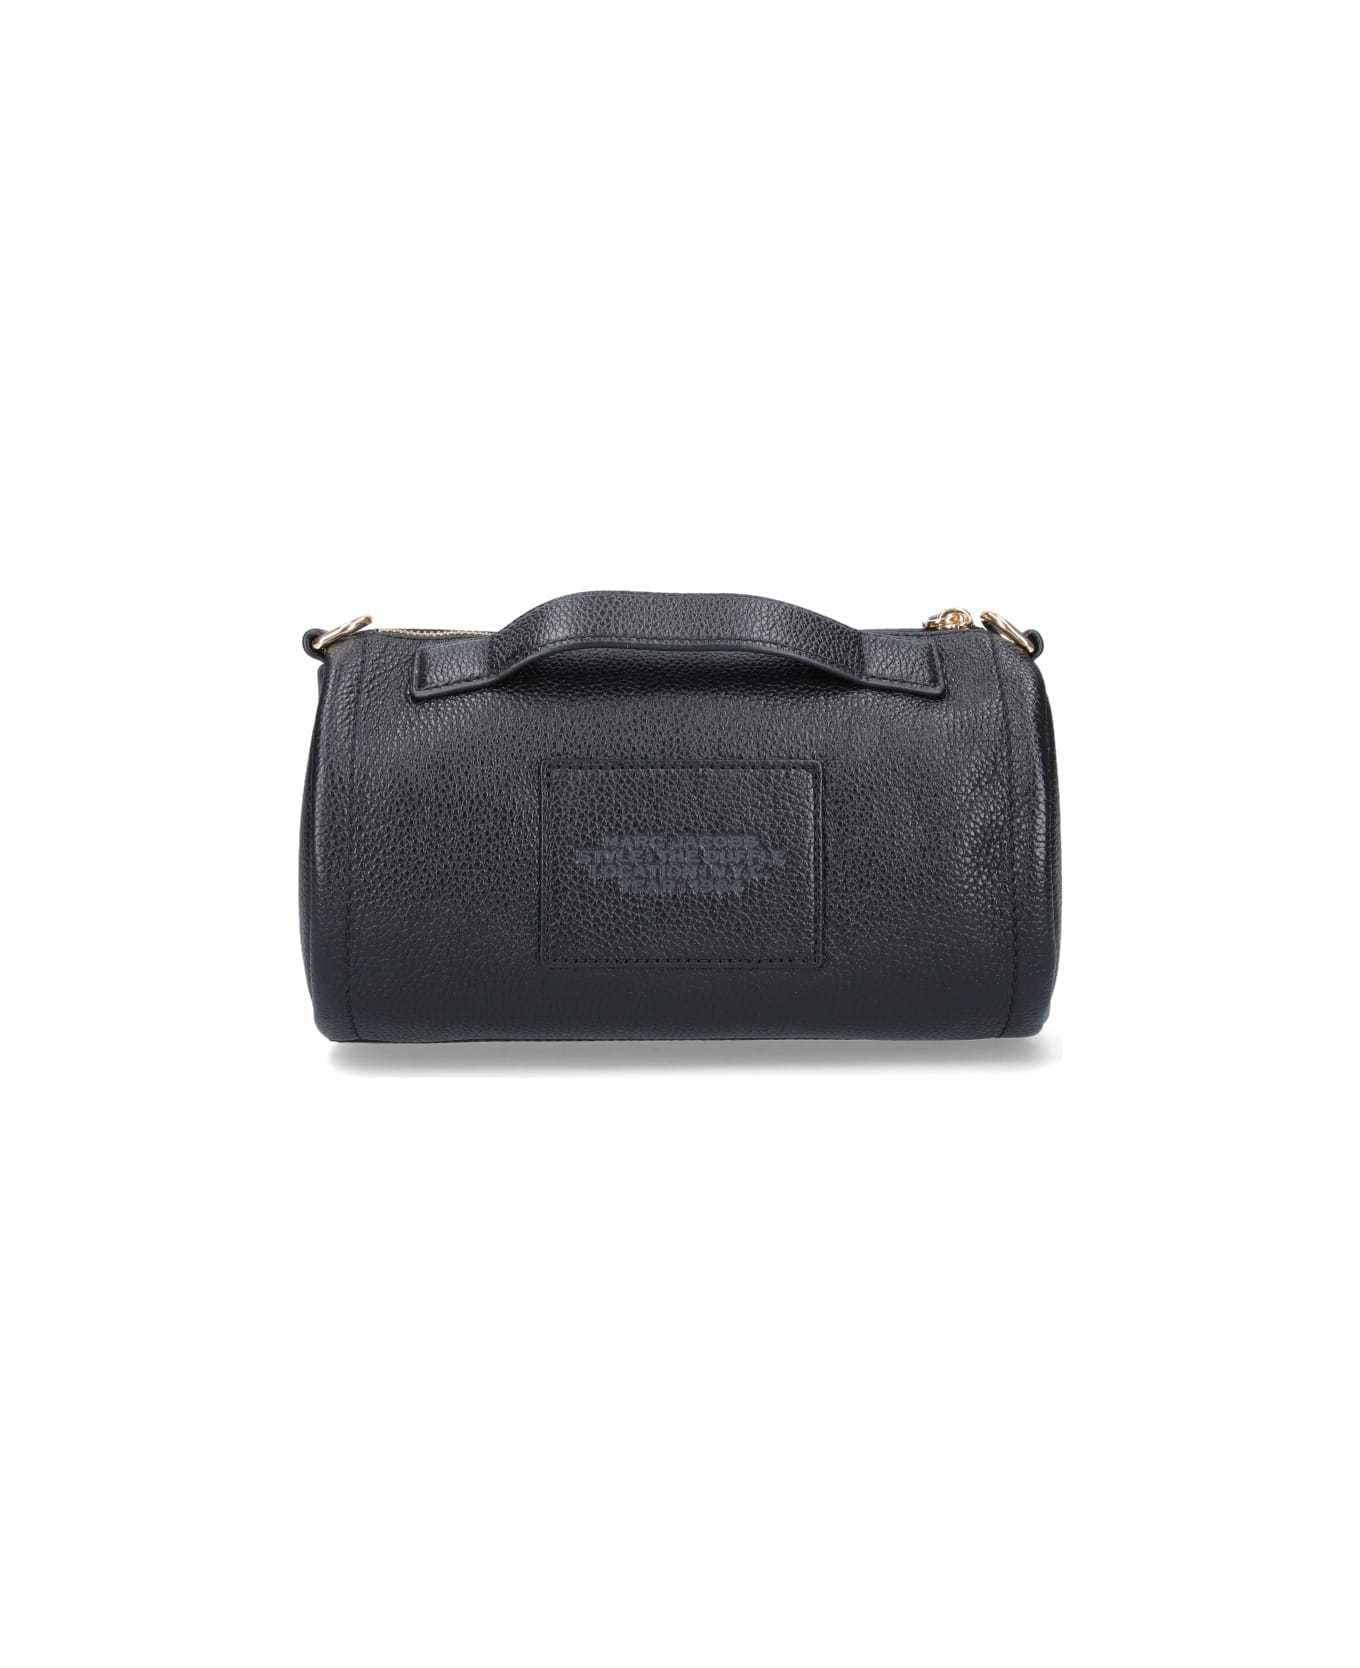 Marc Jacobs Black Leather Duffle Bag - Black クラッチバッグ